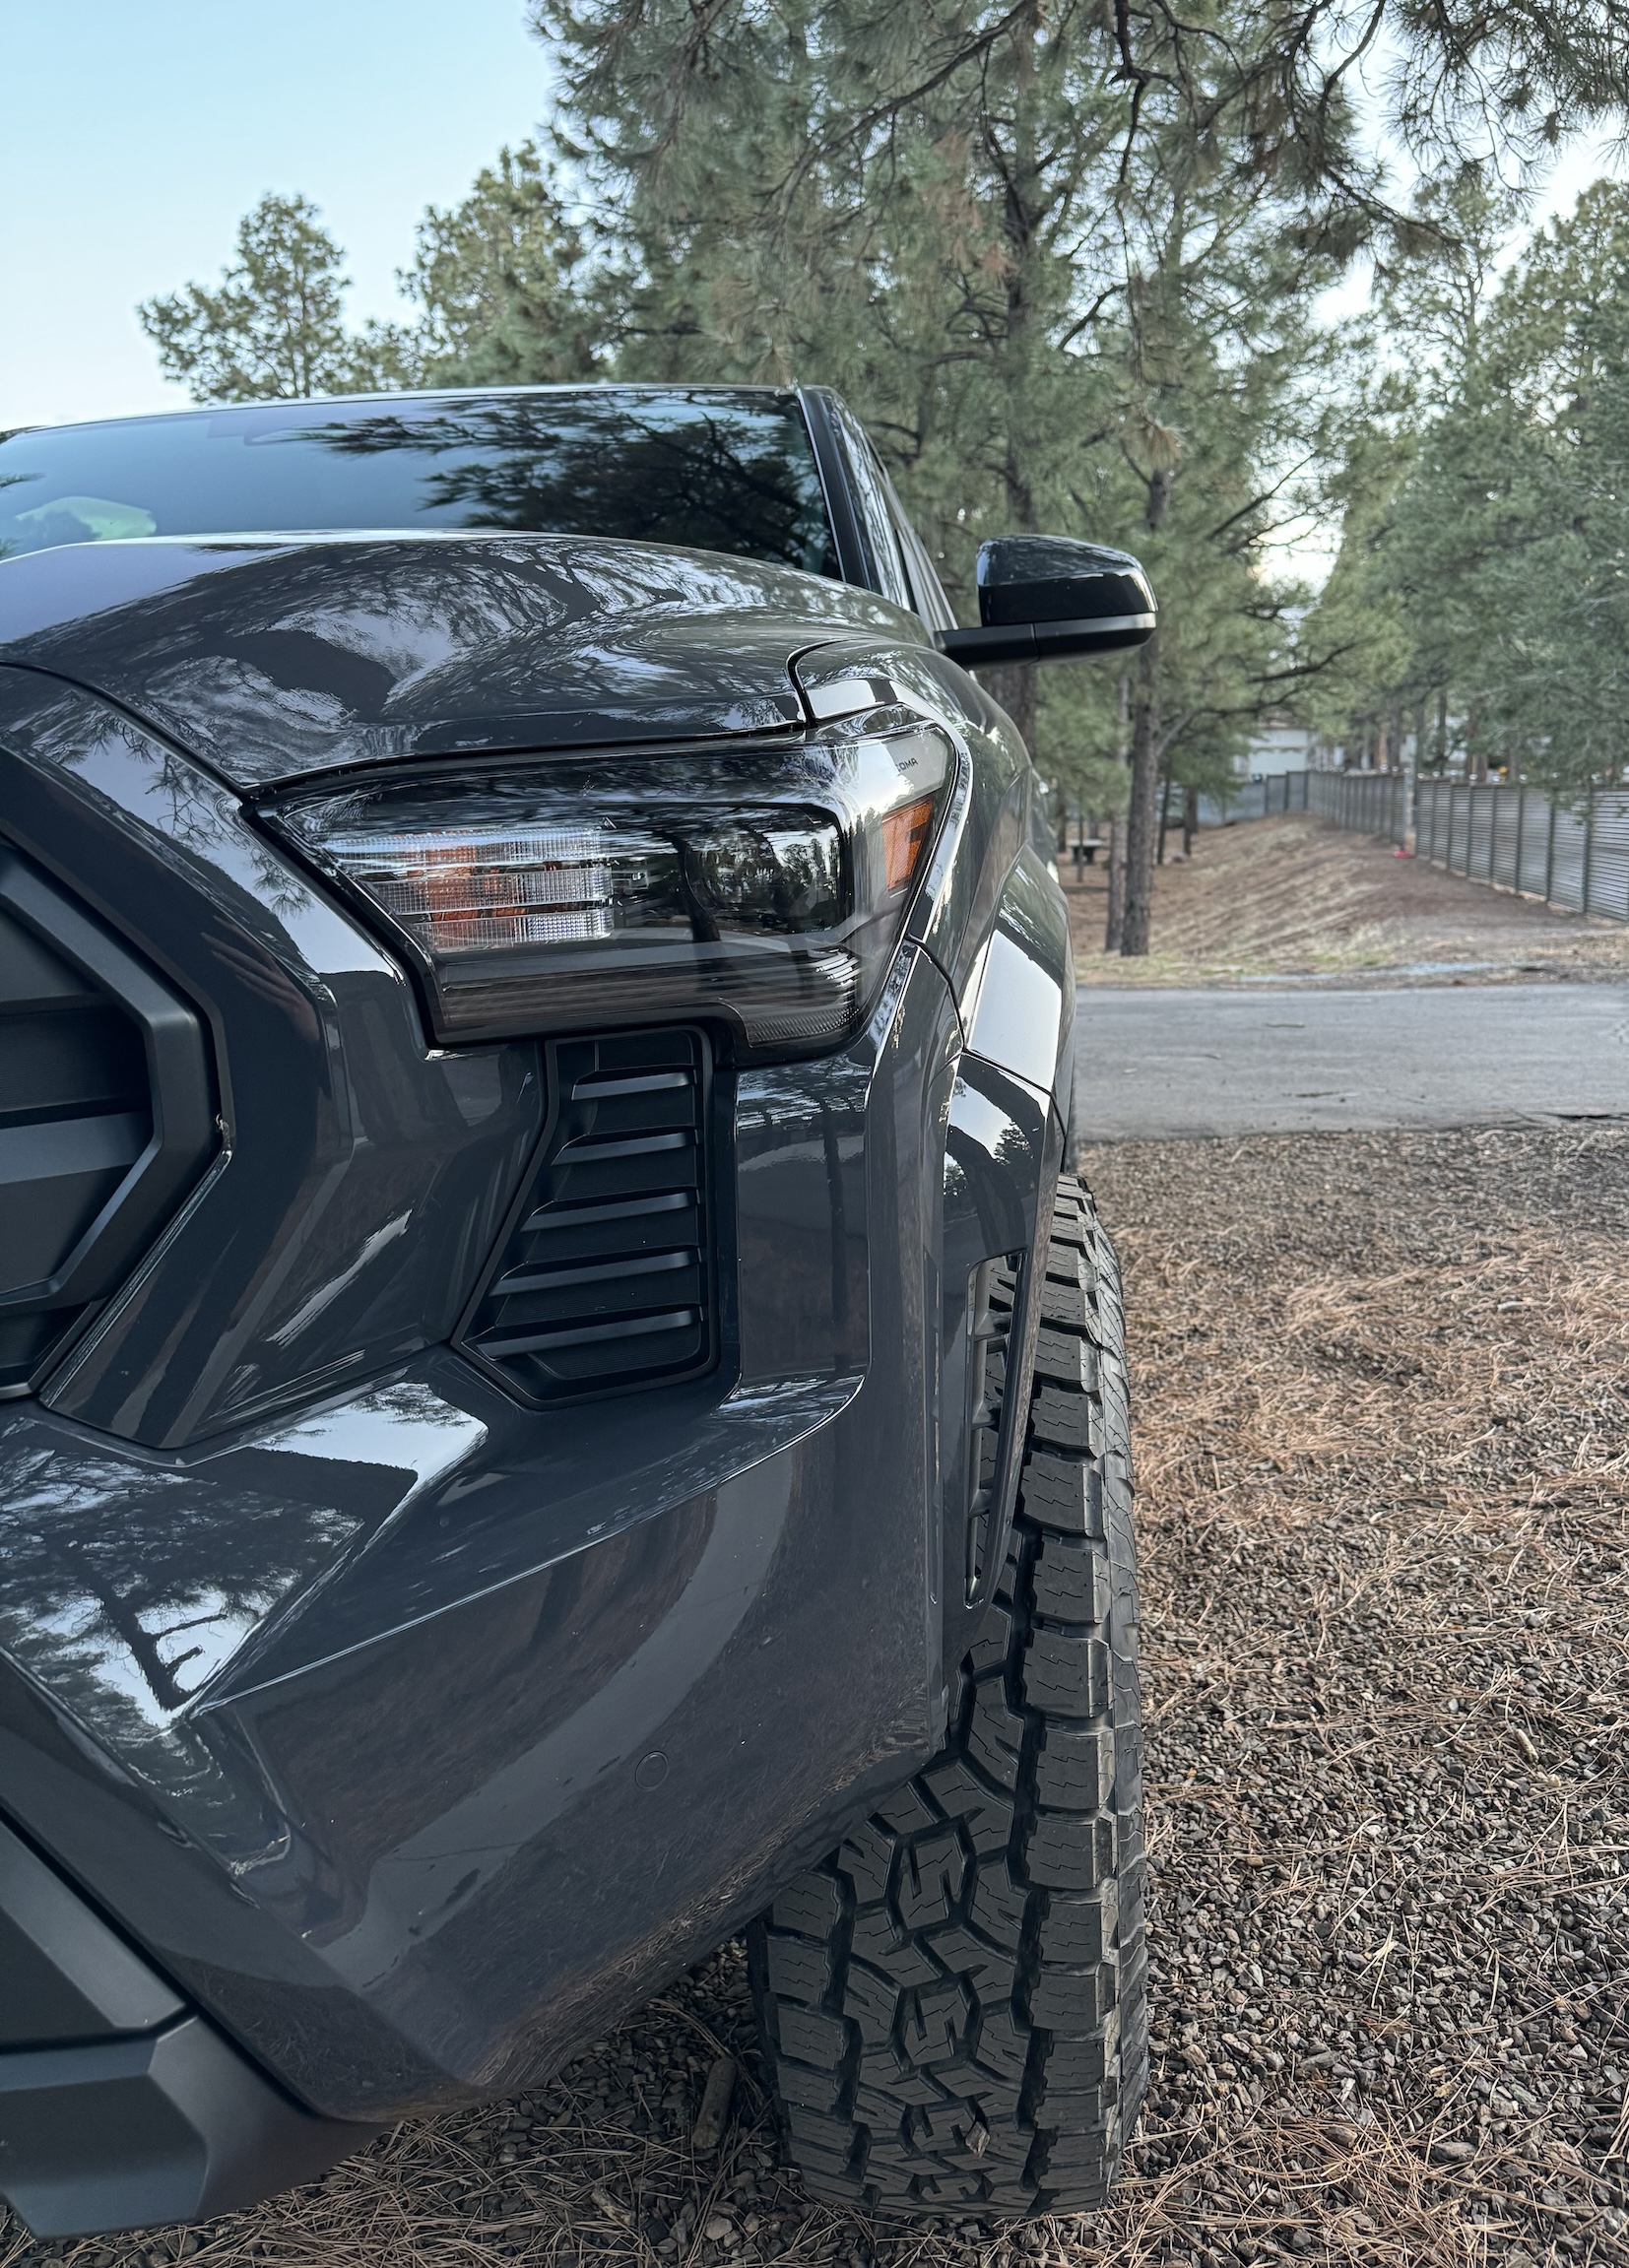 2024 Tacoma Official UNDERGROUND 2024 Tacoma Thread (4th Gen) 2024 Tacoma 4th gen build Toyo Open Country AT3 285:75 and Method 703 +35 offset 2